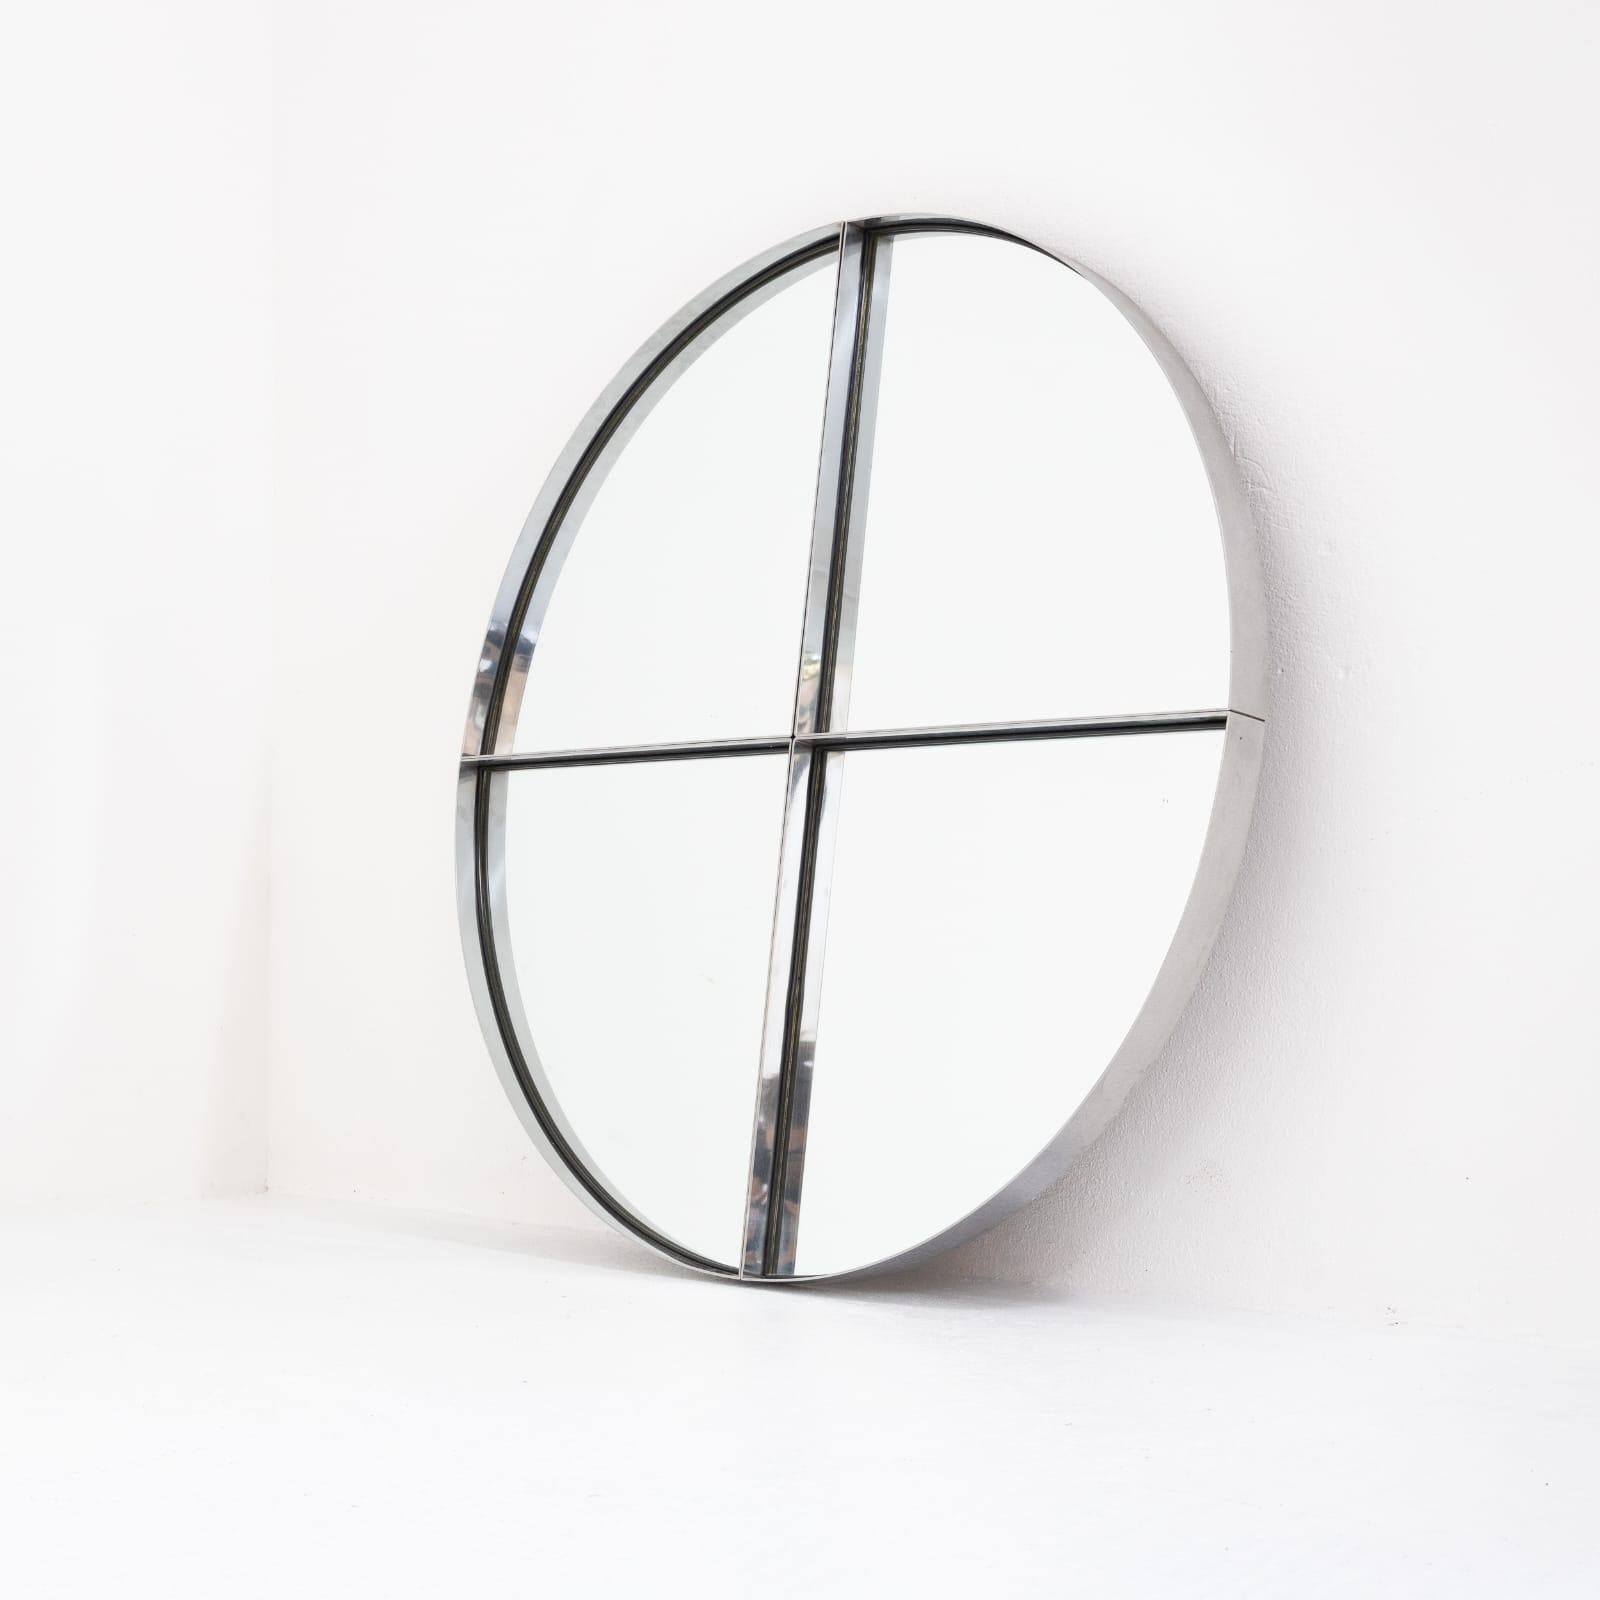 Large Steel Metal Round Mirror by Vittorio Introini for Saporiti. Italy, 1970s For Sale 1